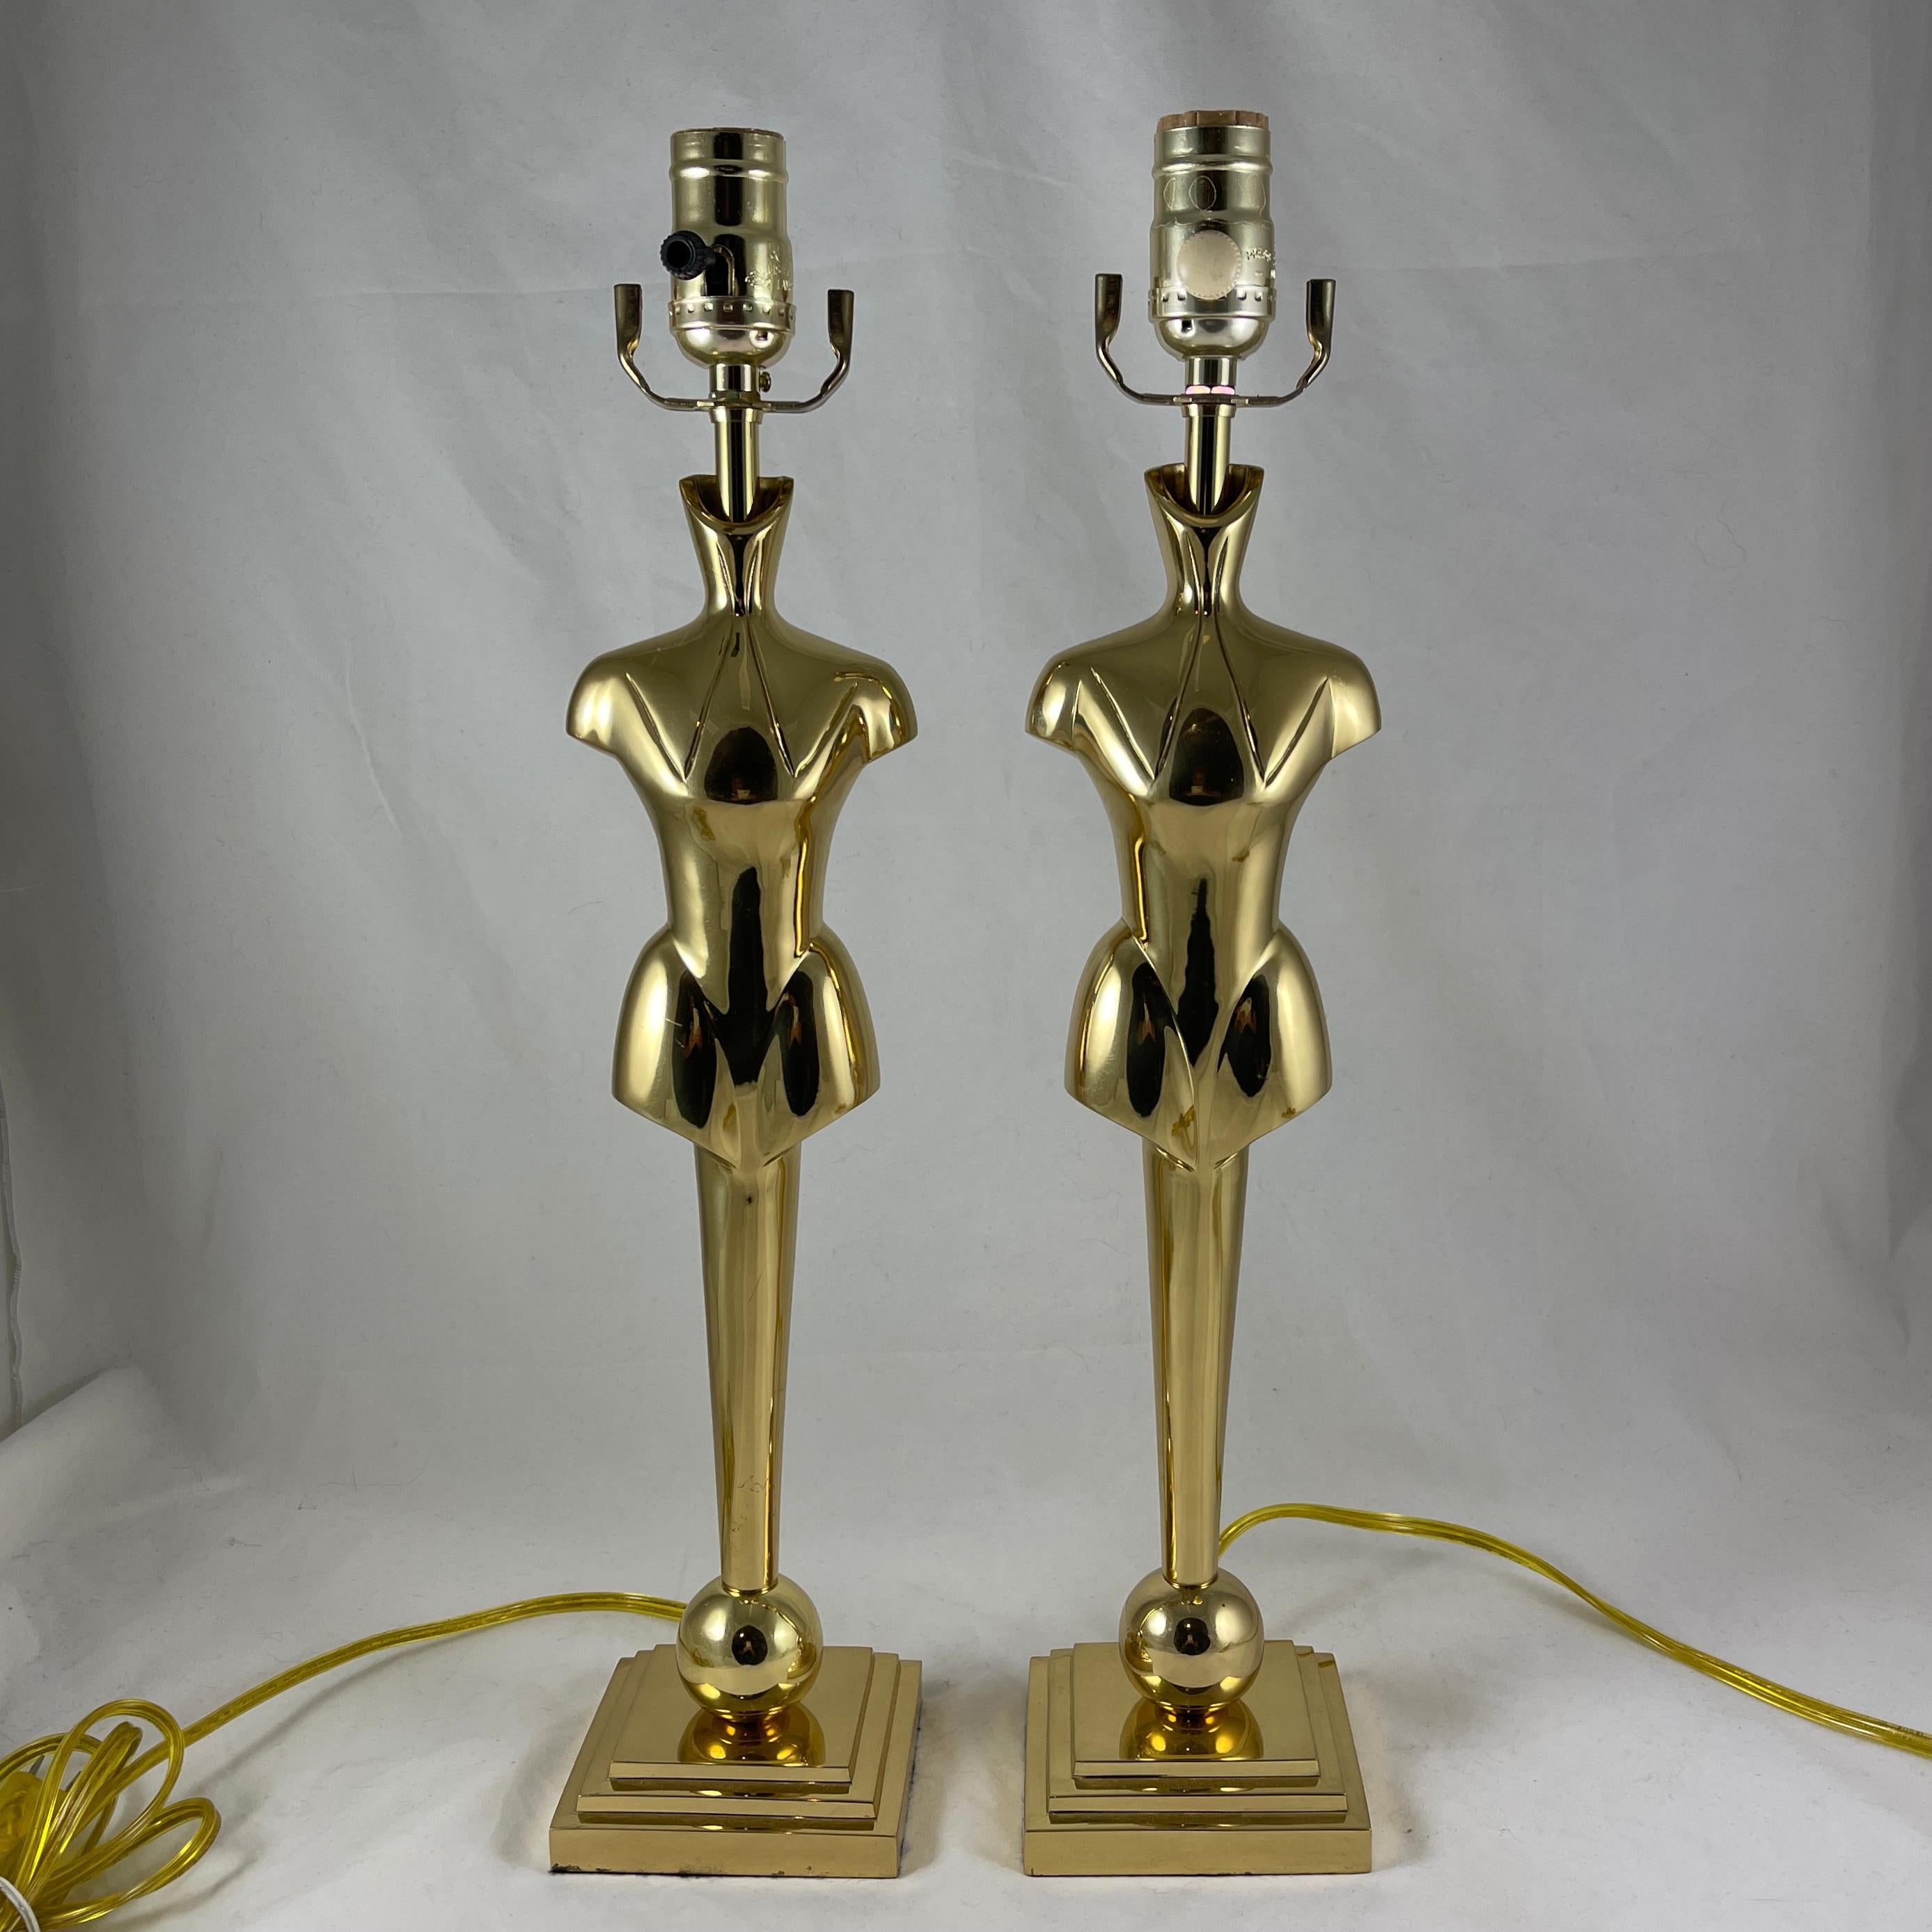 For the pair, fabulous and unusual, tall mid-century brass torso statement lamps, France, circa 1960s.

From a Gentlemans’ Clothier Boutique, this pair would look at home in a mens dressing room, den or game room.
The figure resembles a mens